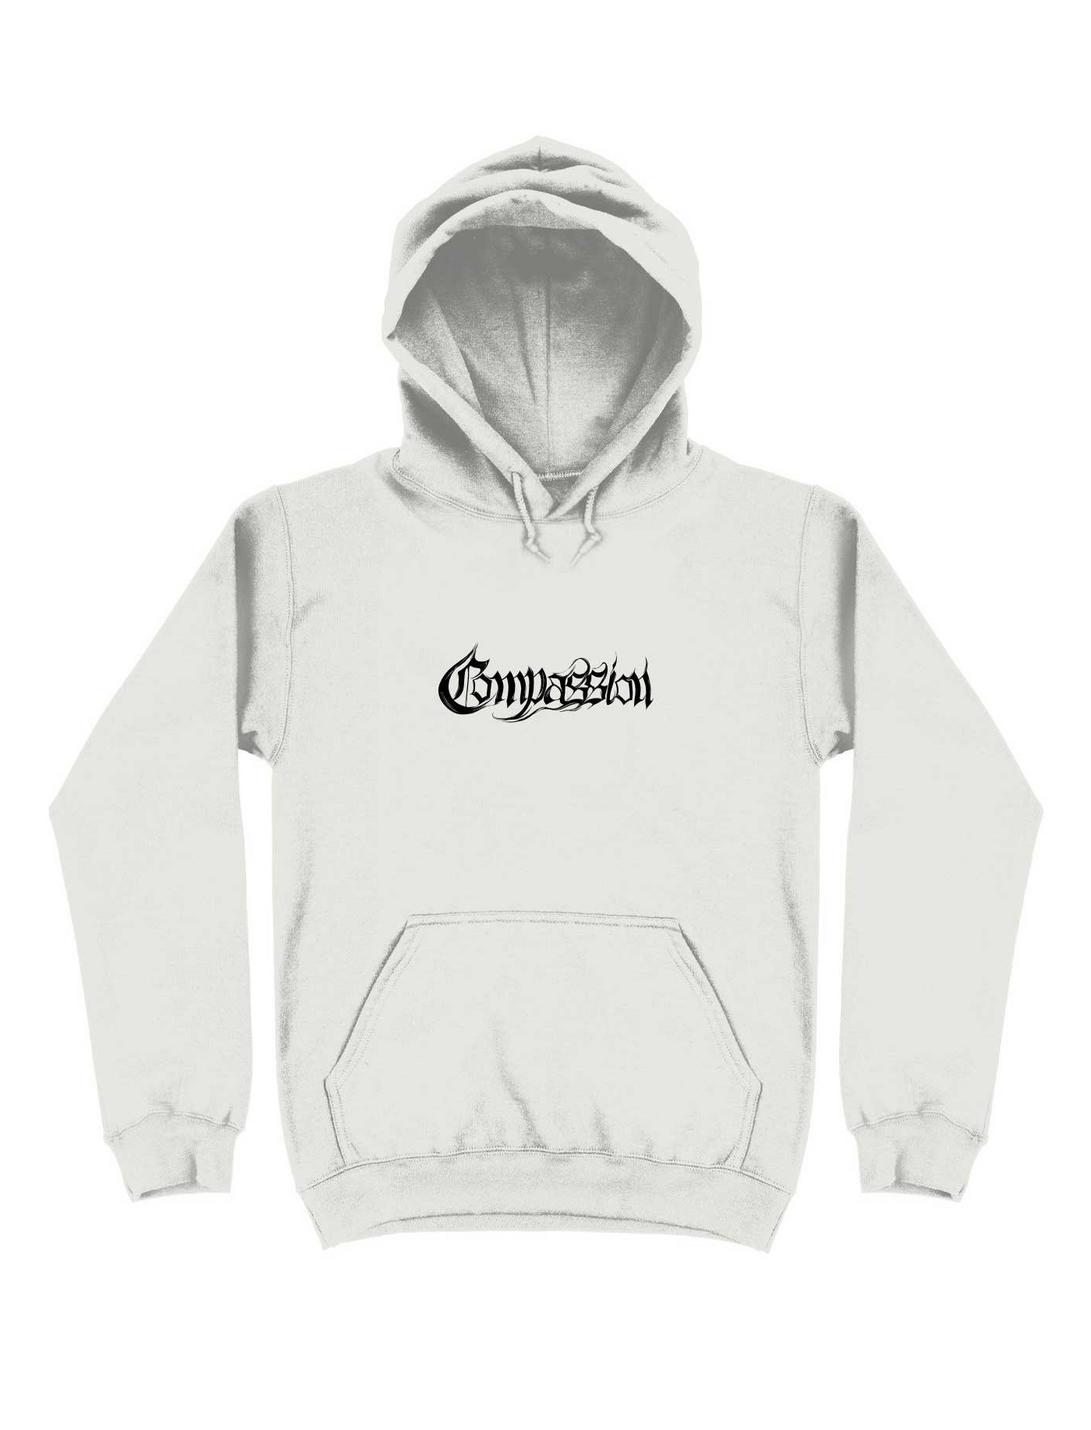 Black History Month Worst Creations Compassion Hoodie, WHITE, hi-res